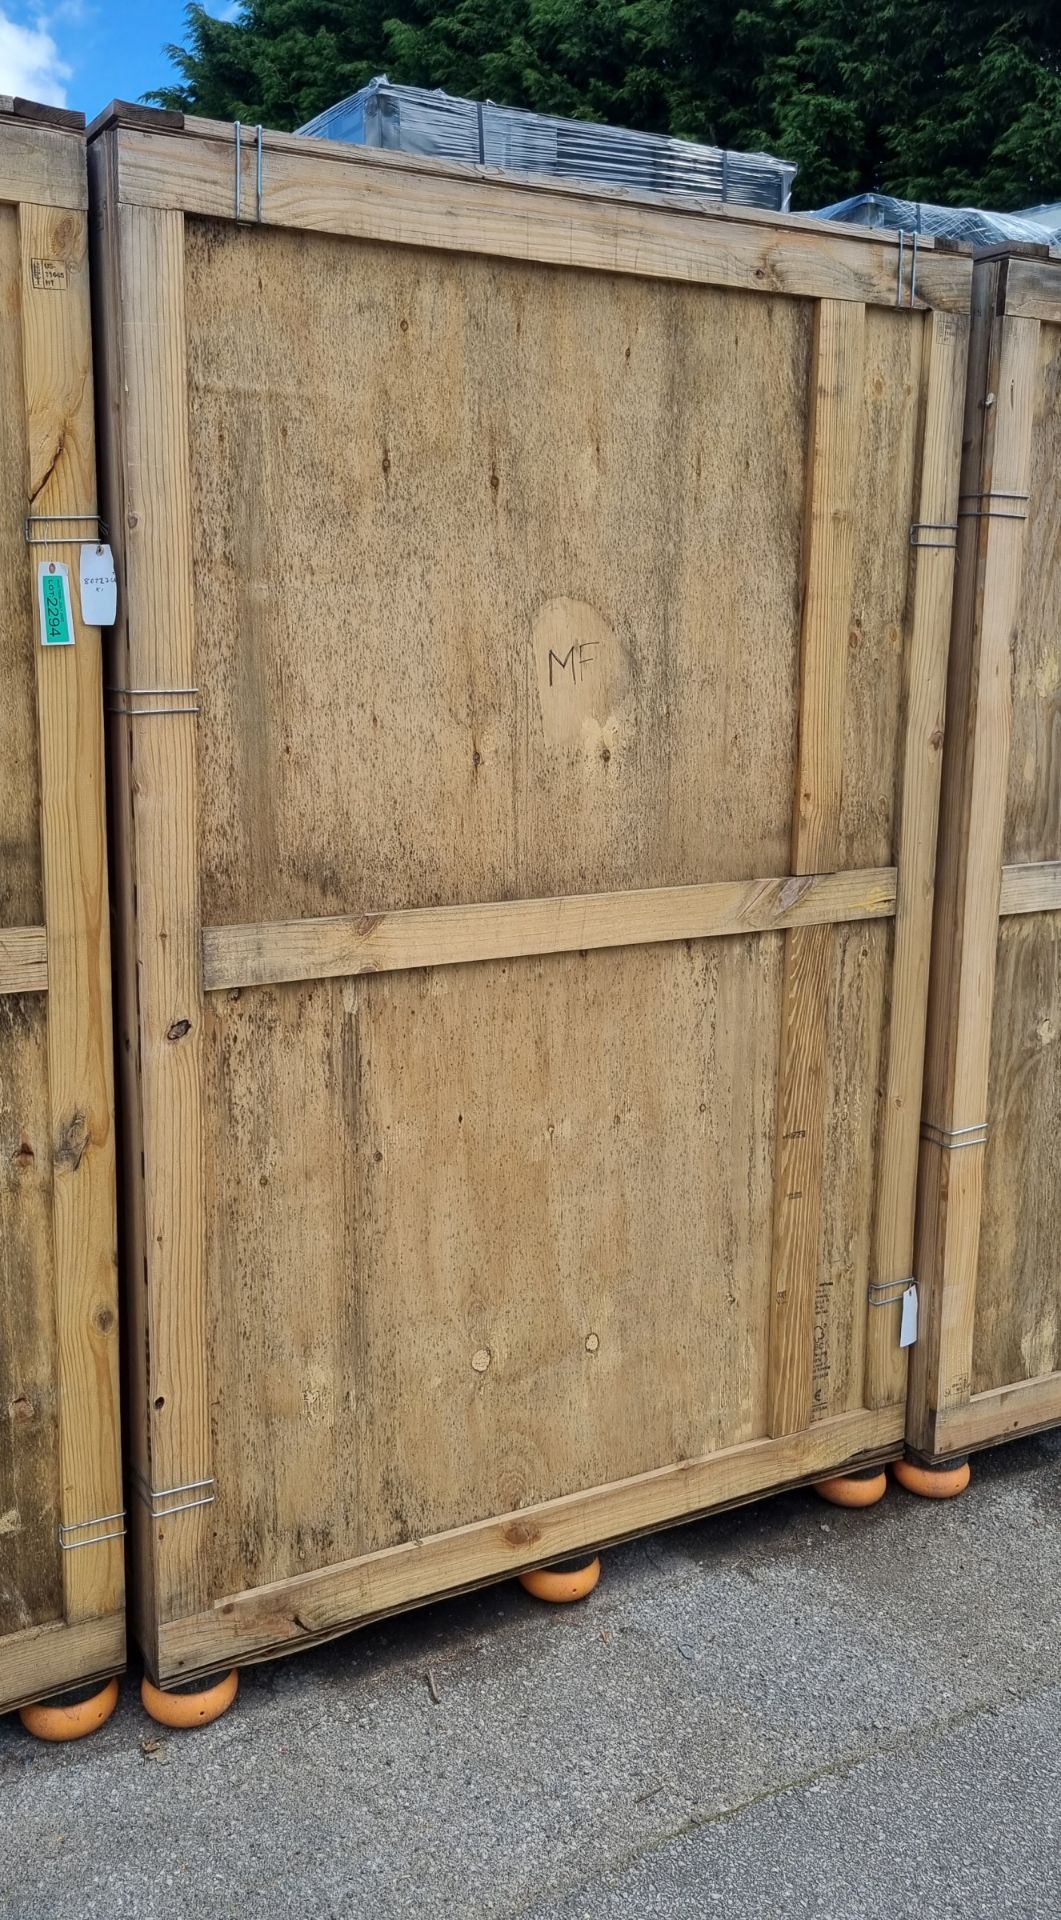 Wooden Shipping Container - L1490 x D960 x H2325mm - Image 2 of 2